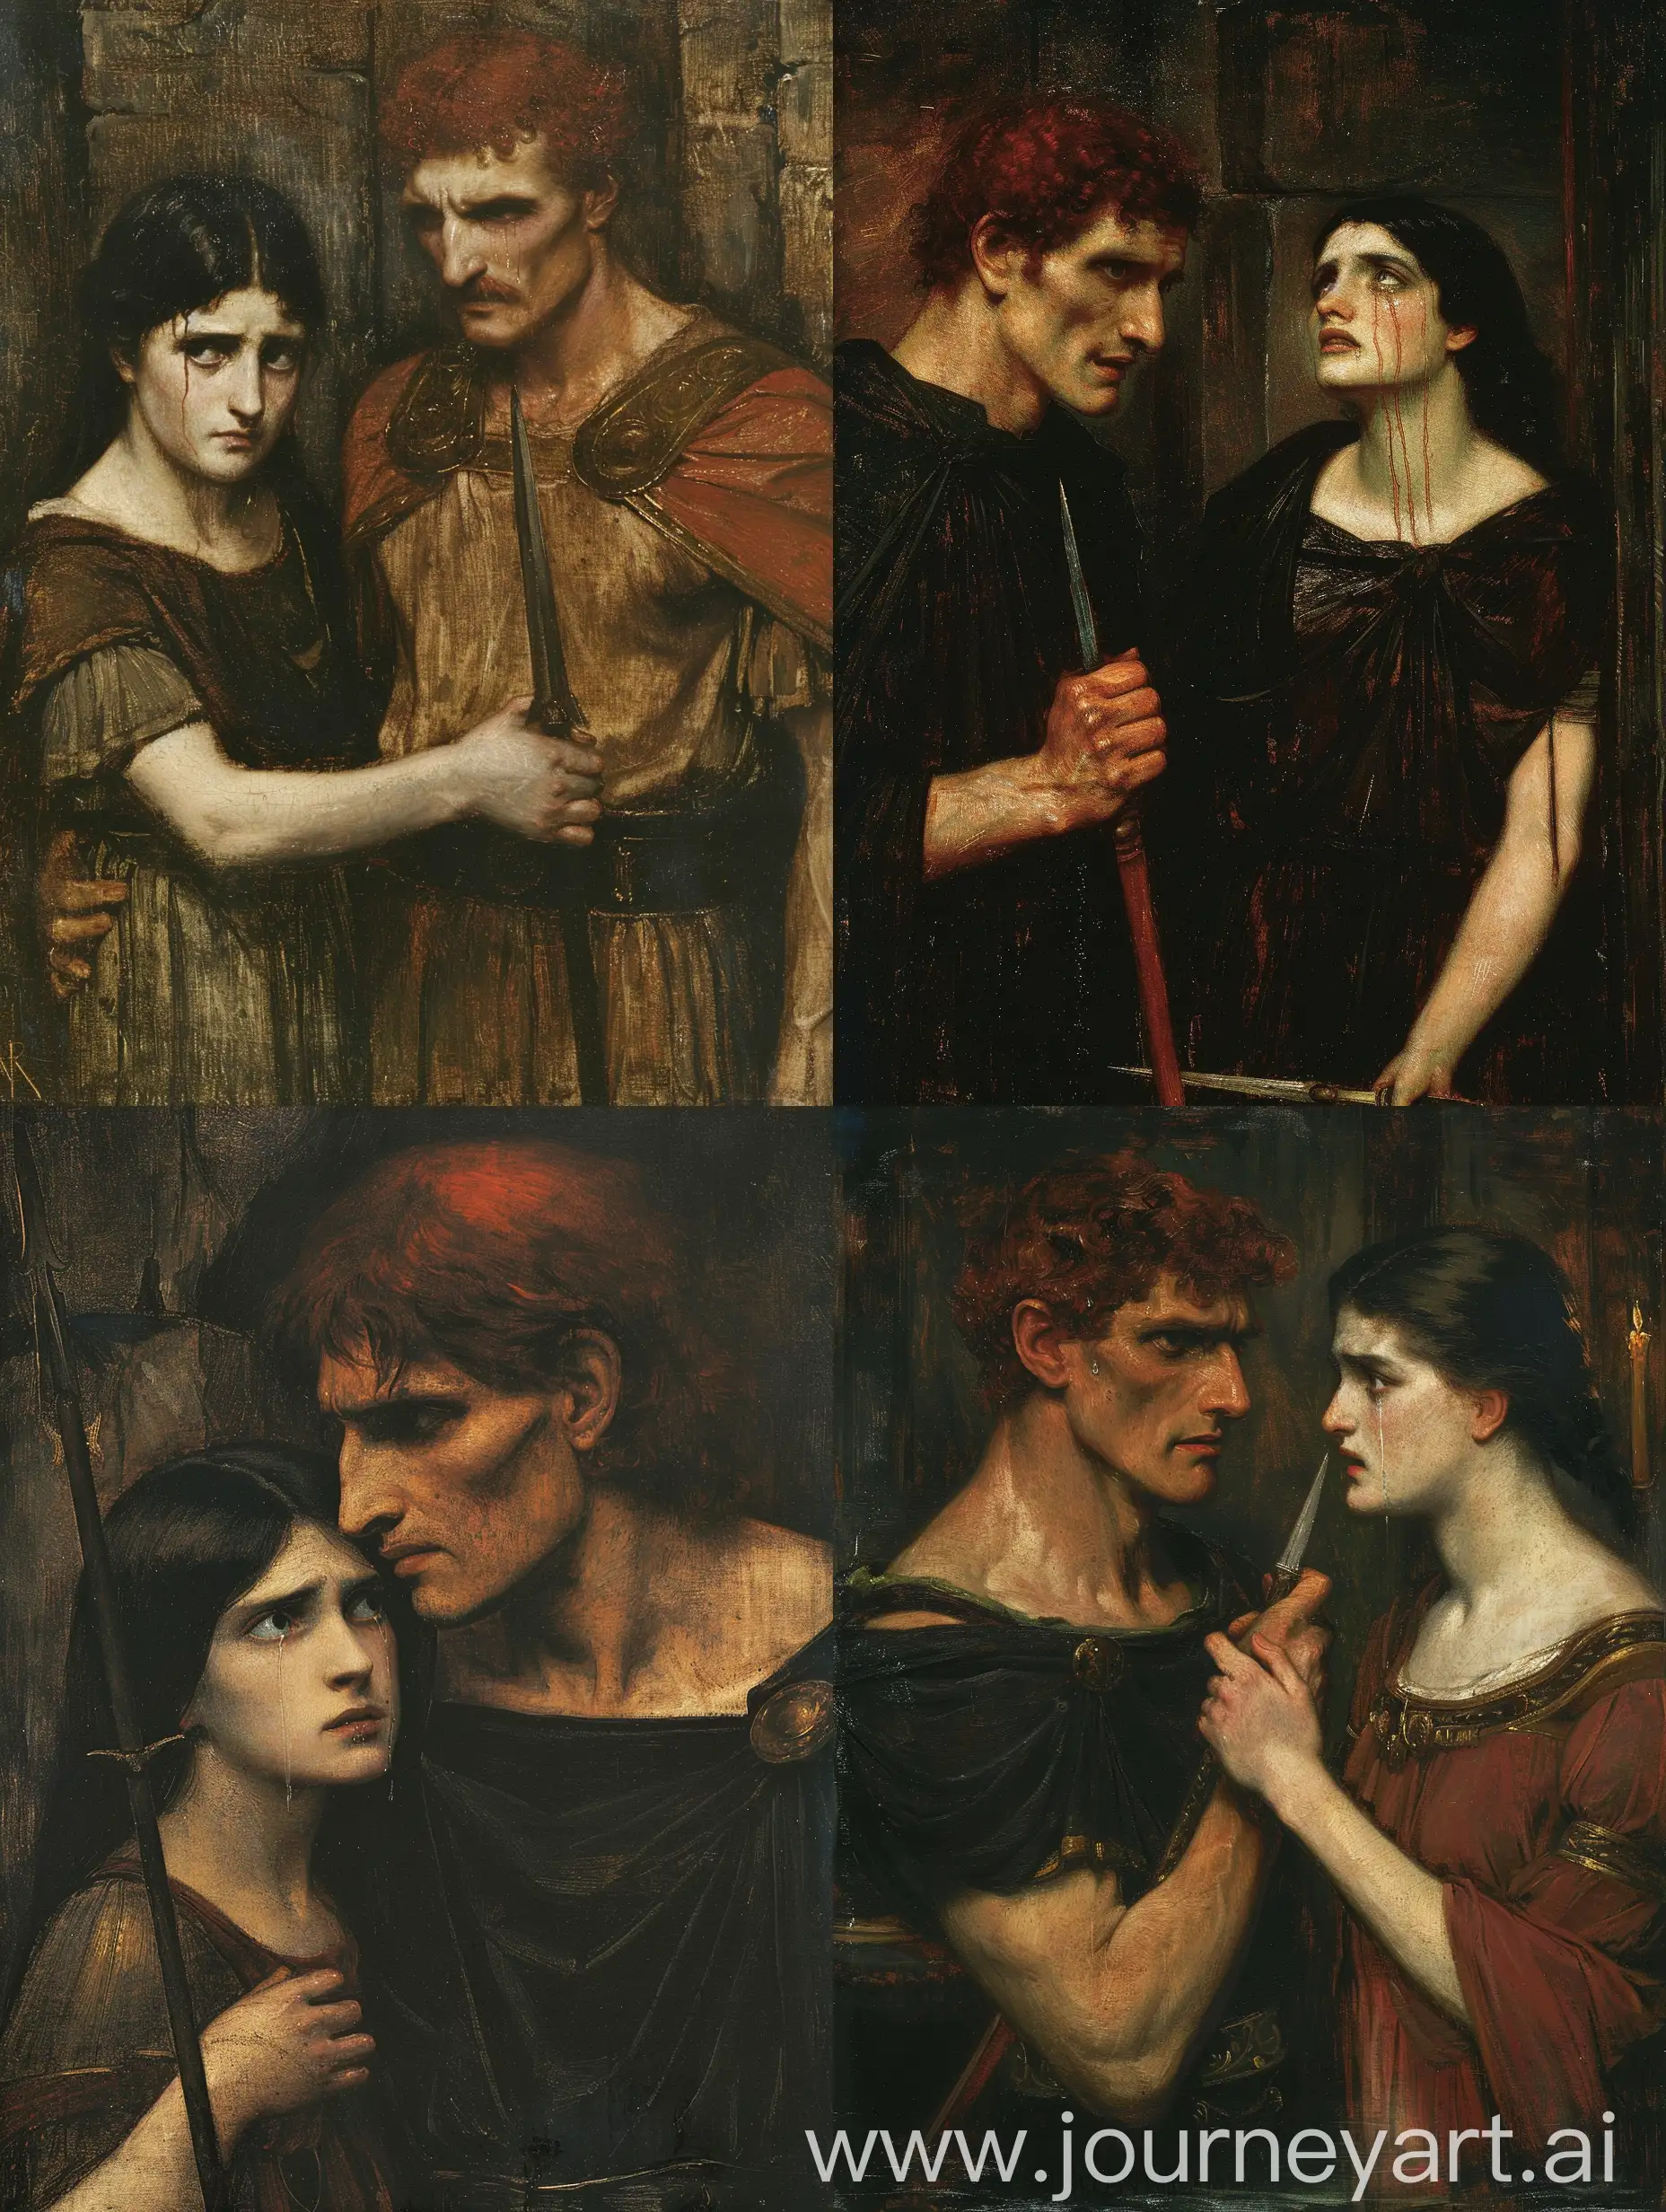 A John William Waterhouse painting of Greek mythology. It shows Agamemnon, King of kings, with reddish brown hair, and his daughter Iphigenia with black hair like her mother. She stand before him, tears in her eyes, and he holds a dagger towards her.